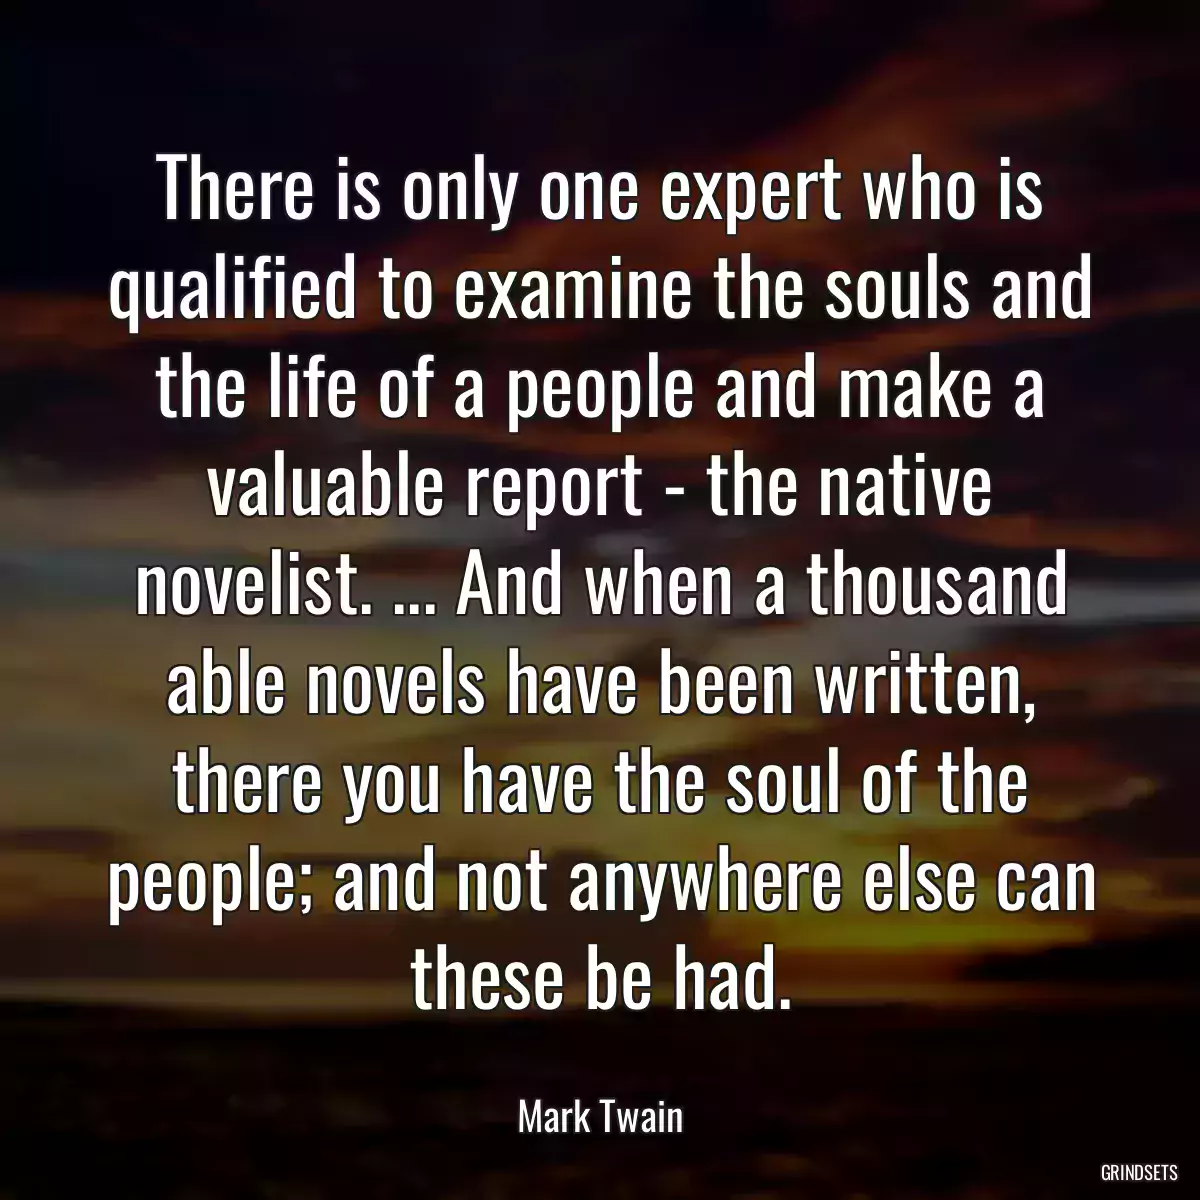 There is only one expert who is qualified to examine the souls and the life of a people and make a valuable report - the native novelist. ... And when a thousand able novels have been written, there you have the soul of the people; and not anywhere else can these be had.